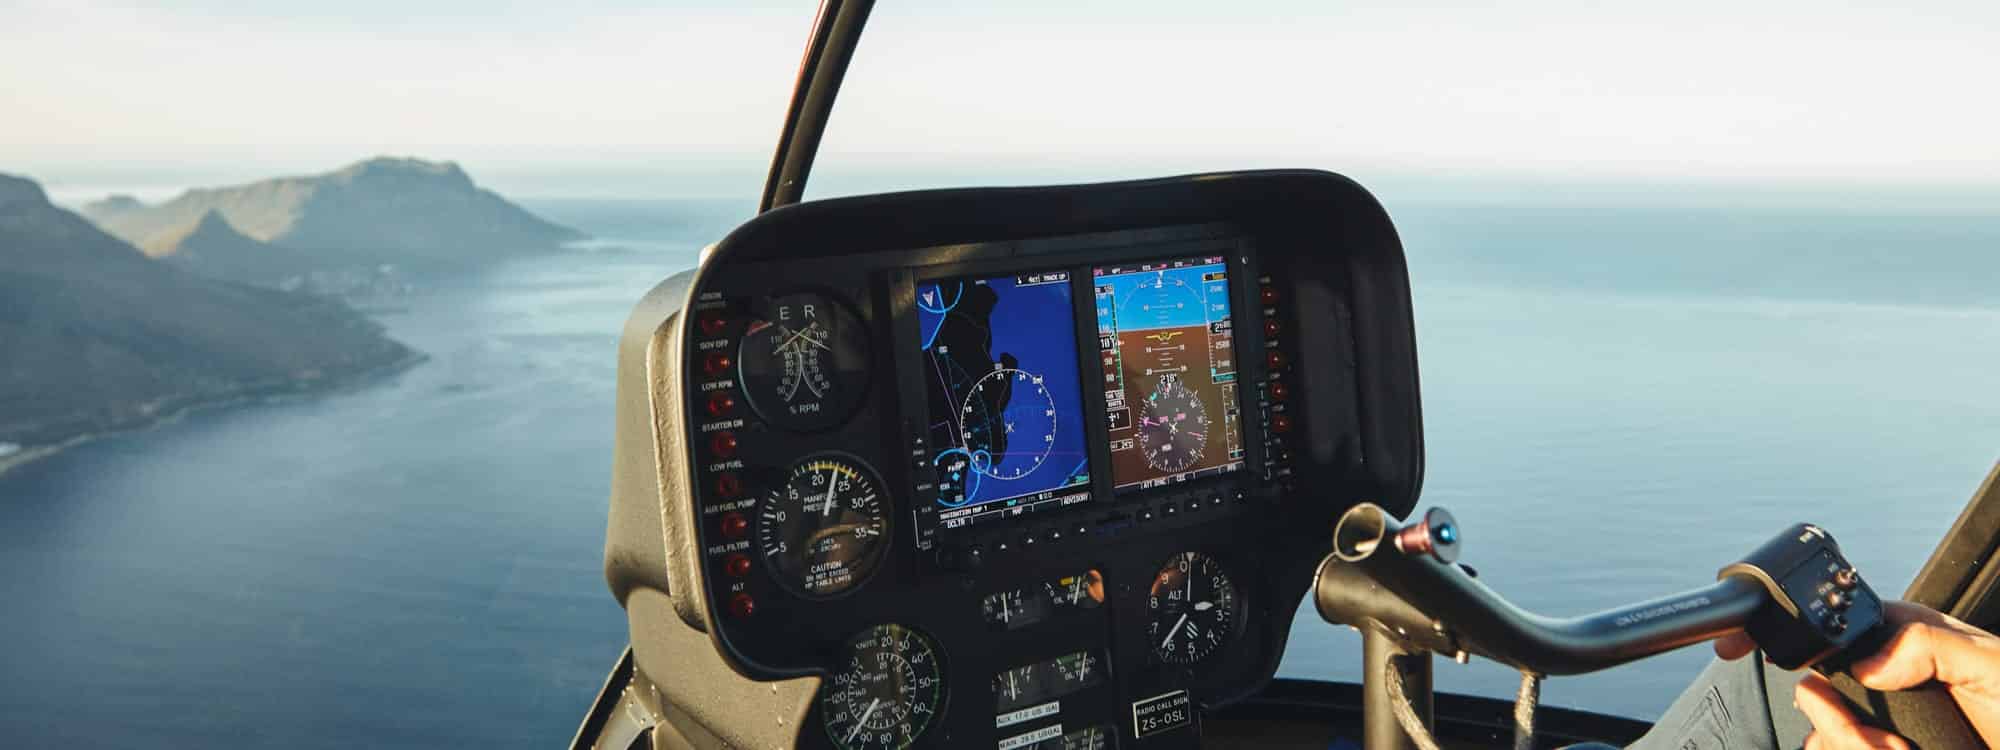 A helicopter pilot navigates changing circumstances with the guidance received from Southpac aerospace's Change Management Course.